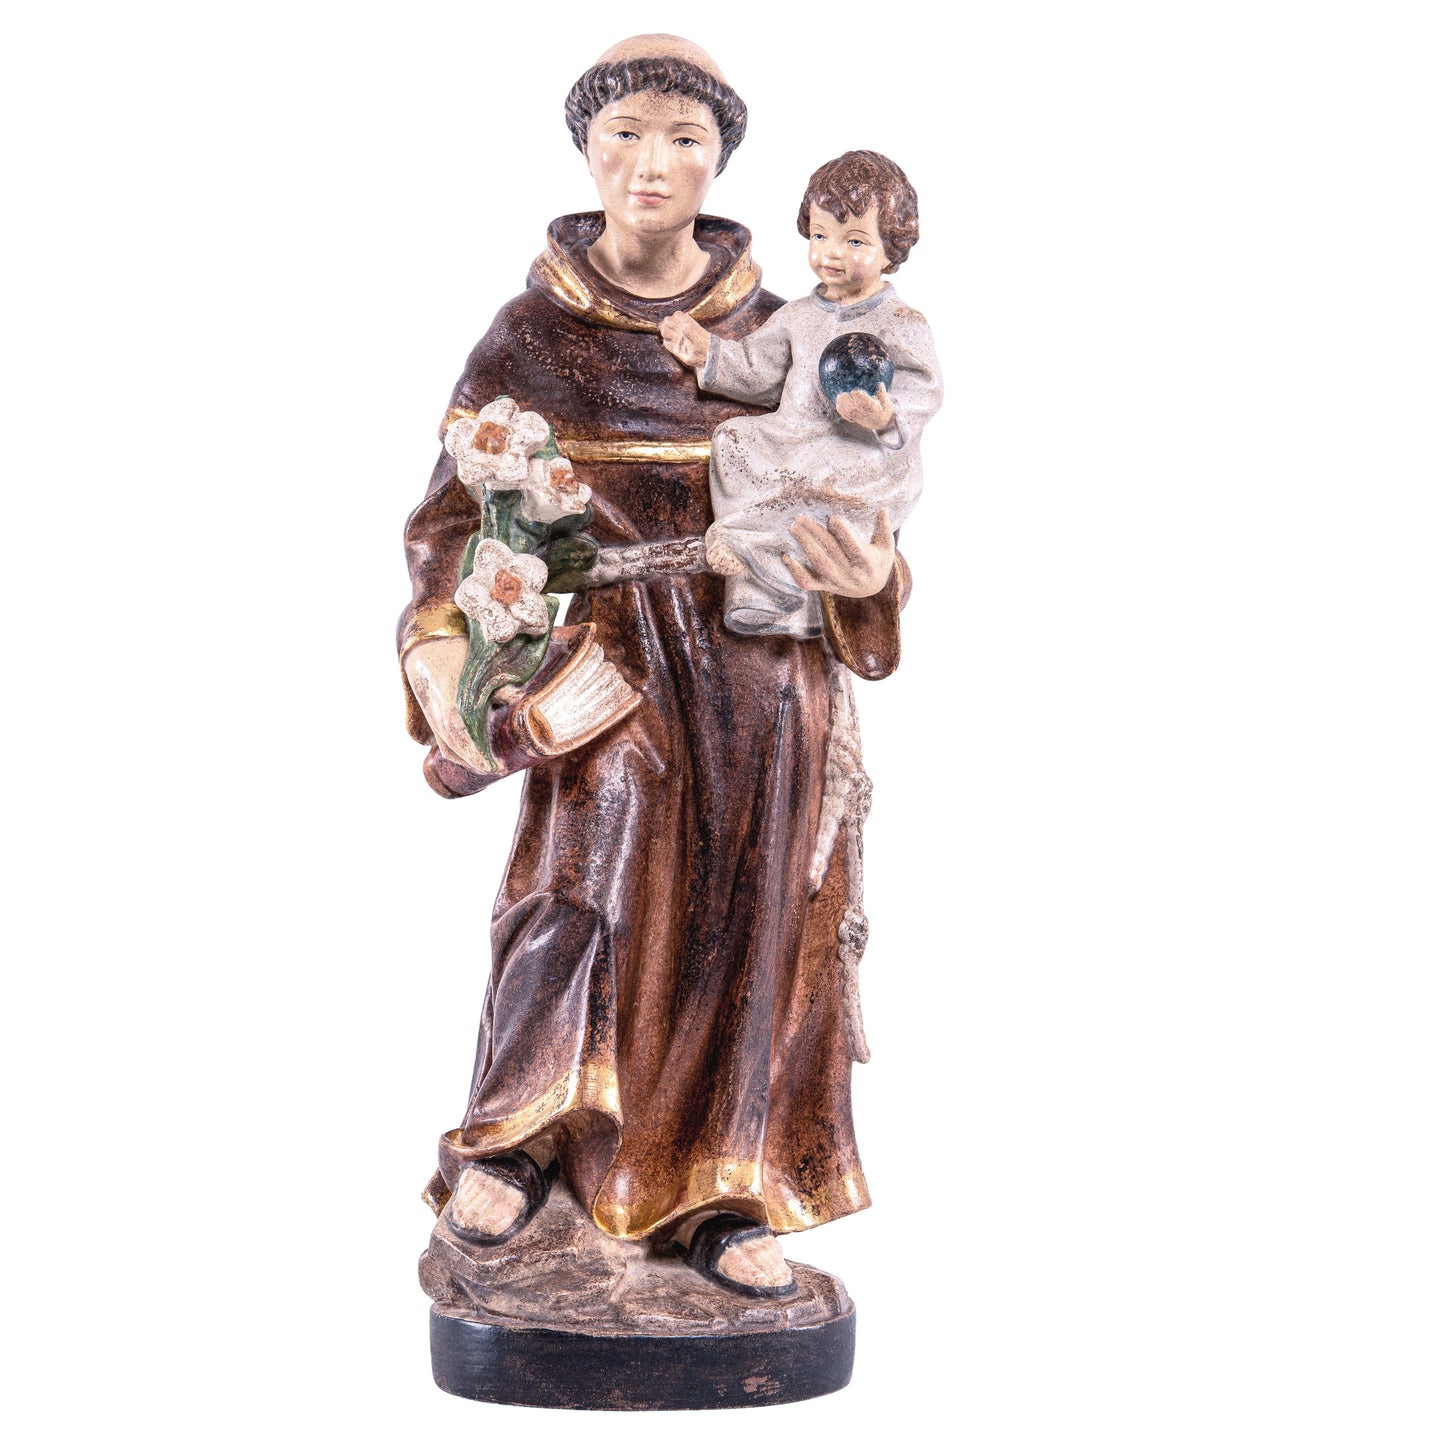 MONDO CATTOLICO Golden / 30 cm (11.8 in) Wooden Statue of St. Anthony